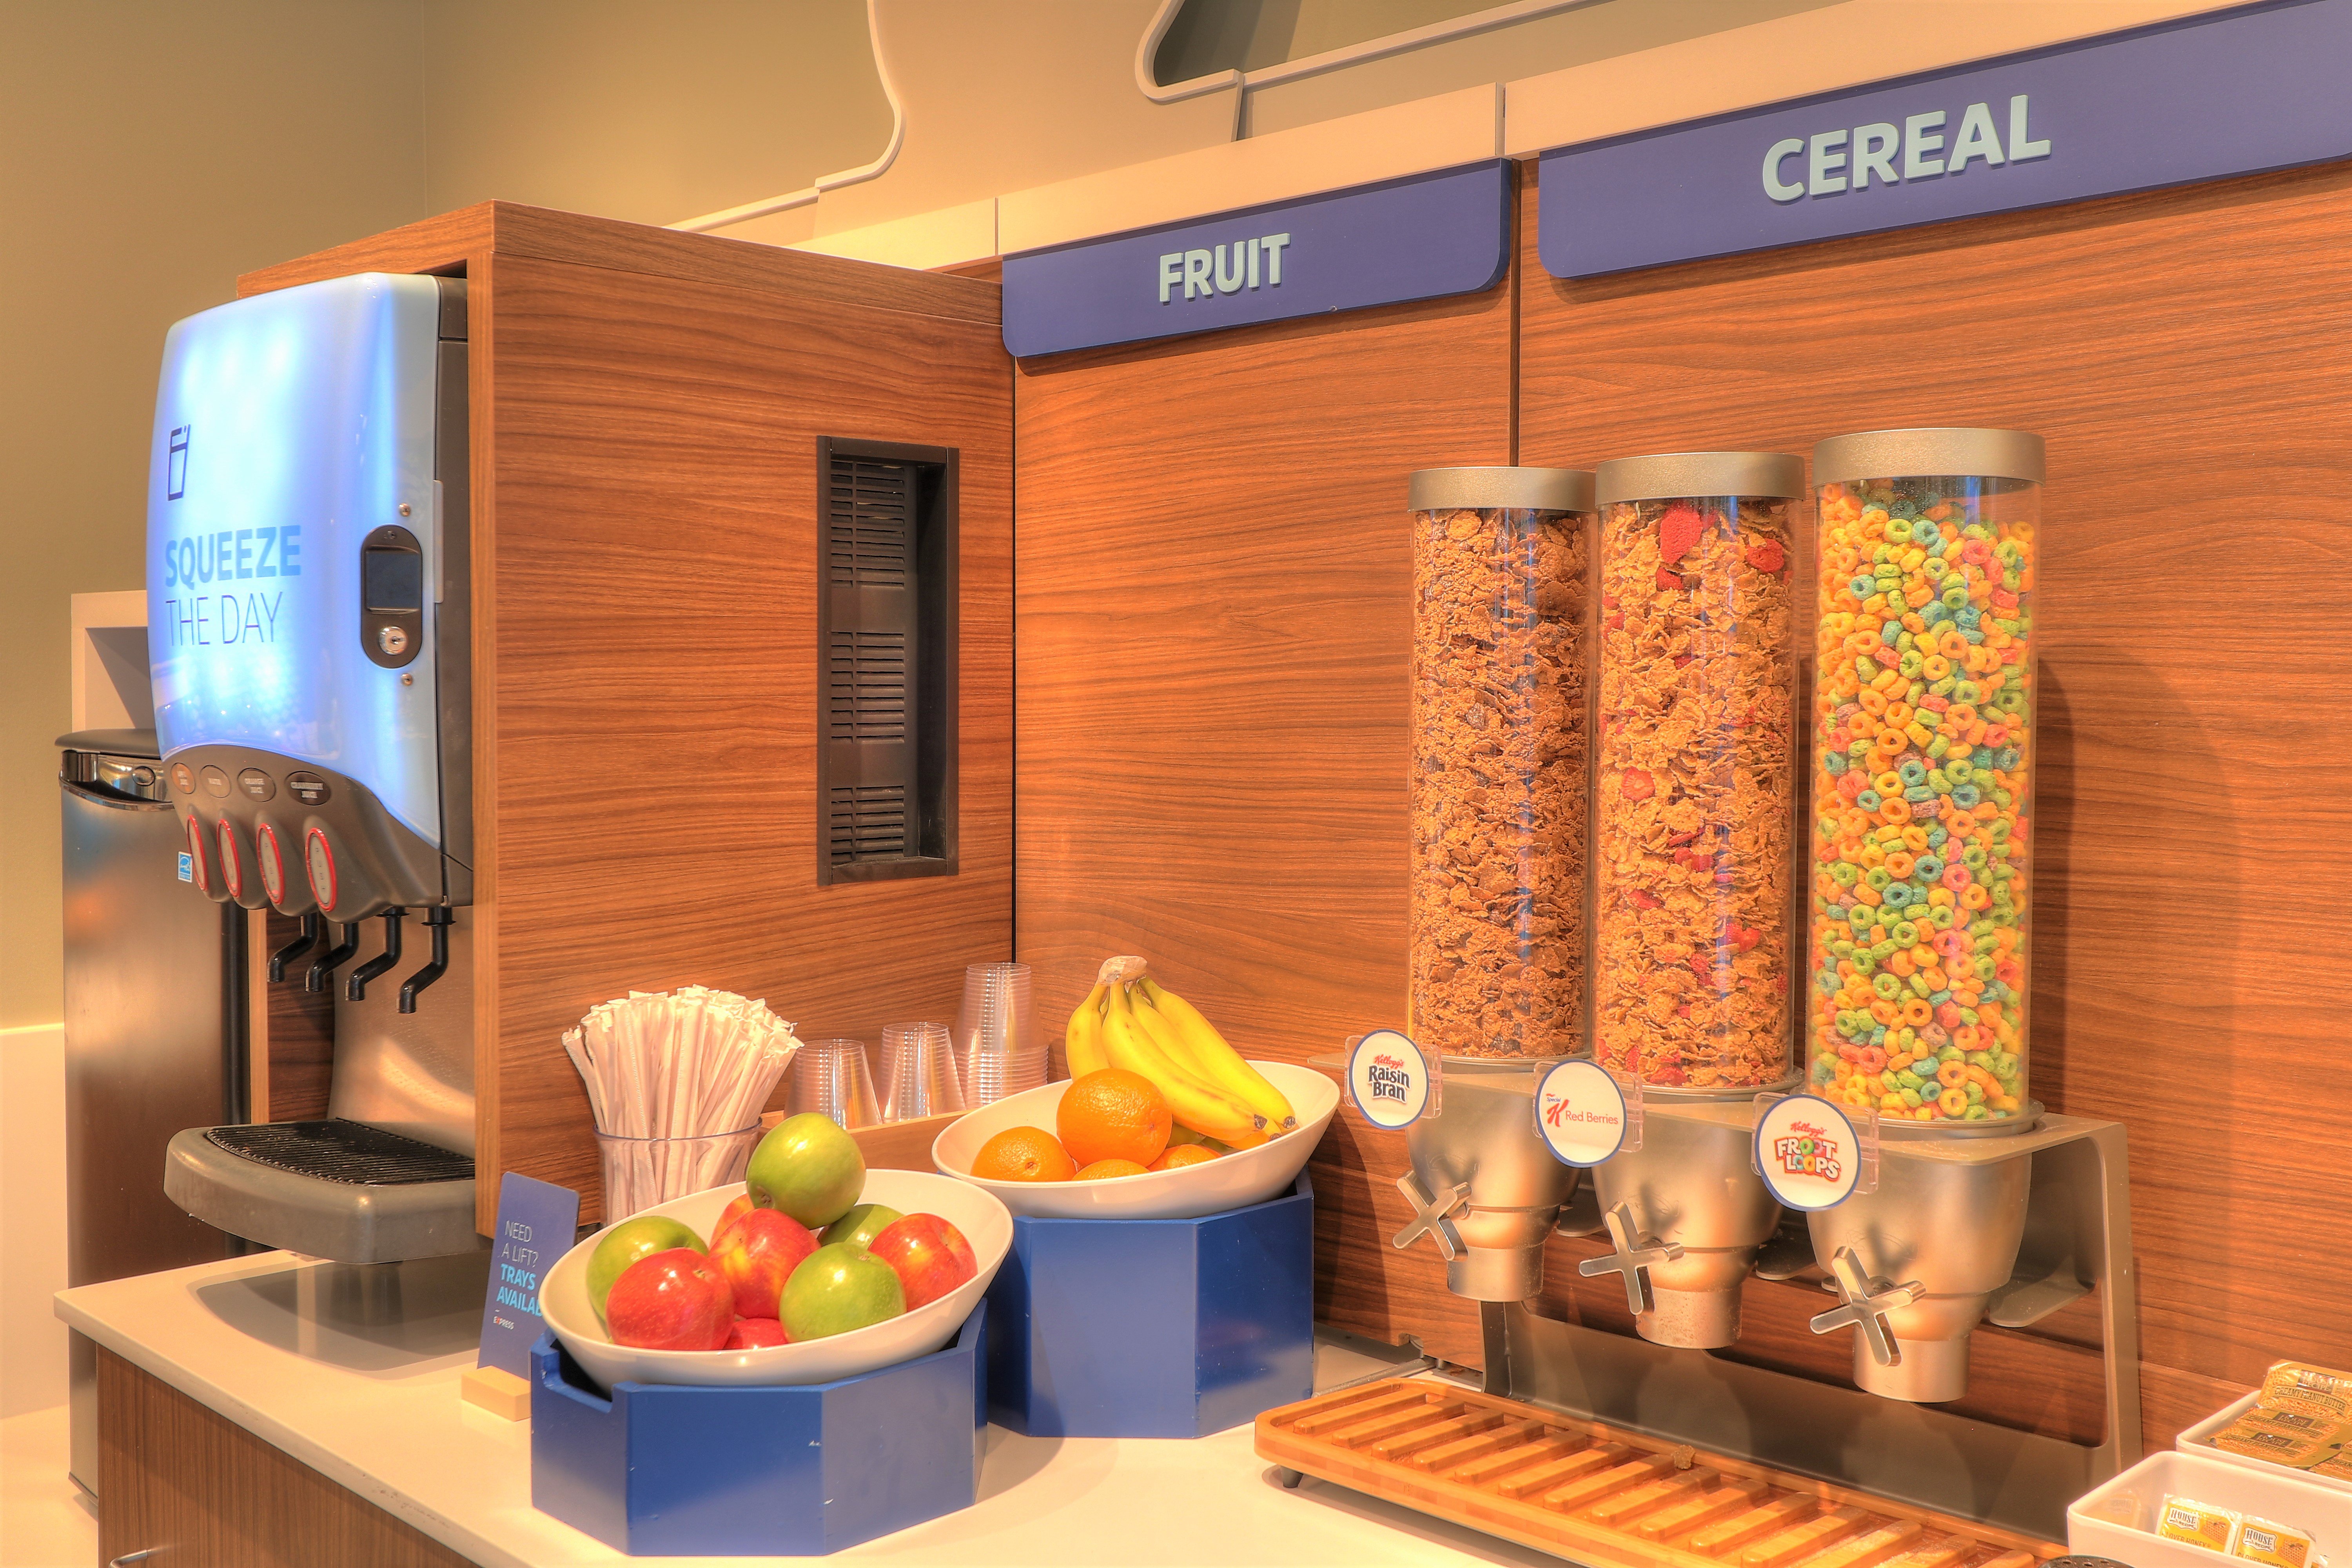 Cold Cereal and Fresh Fruit is always available at Breakfast